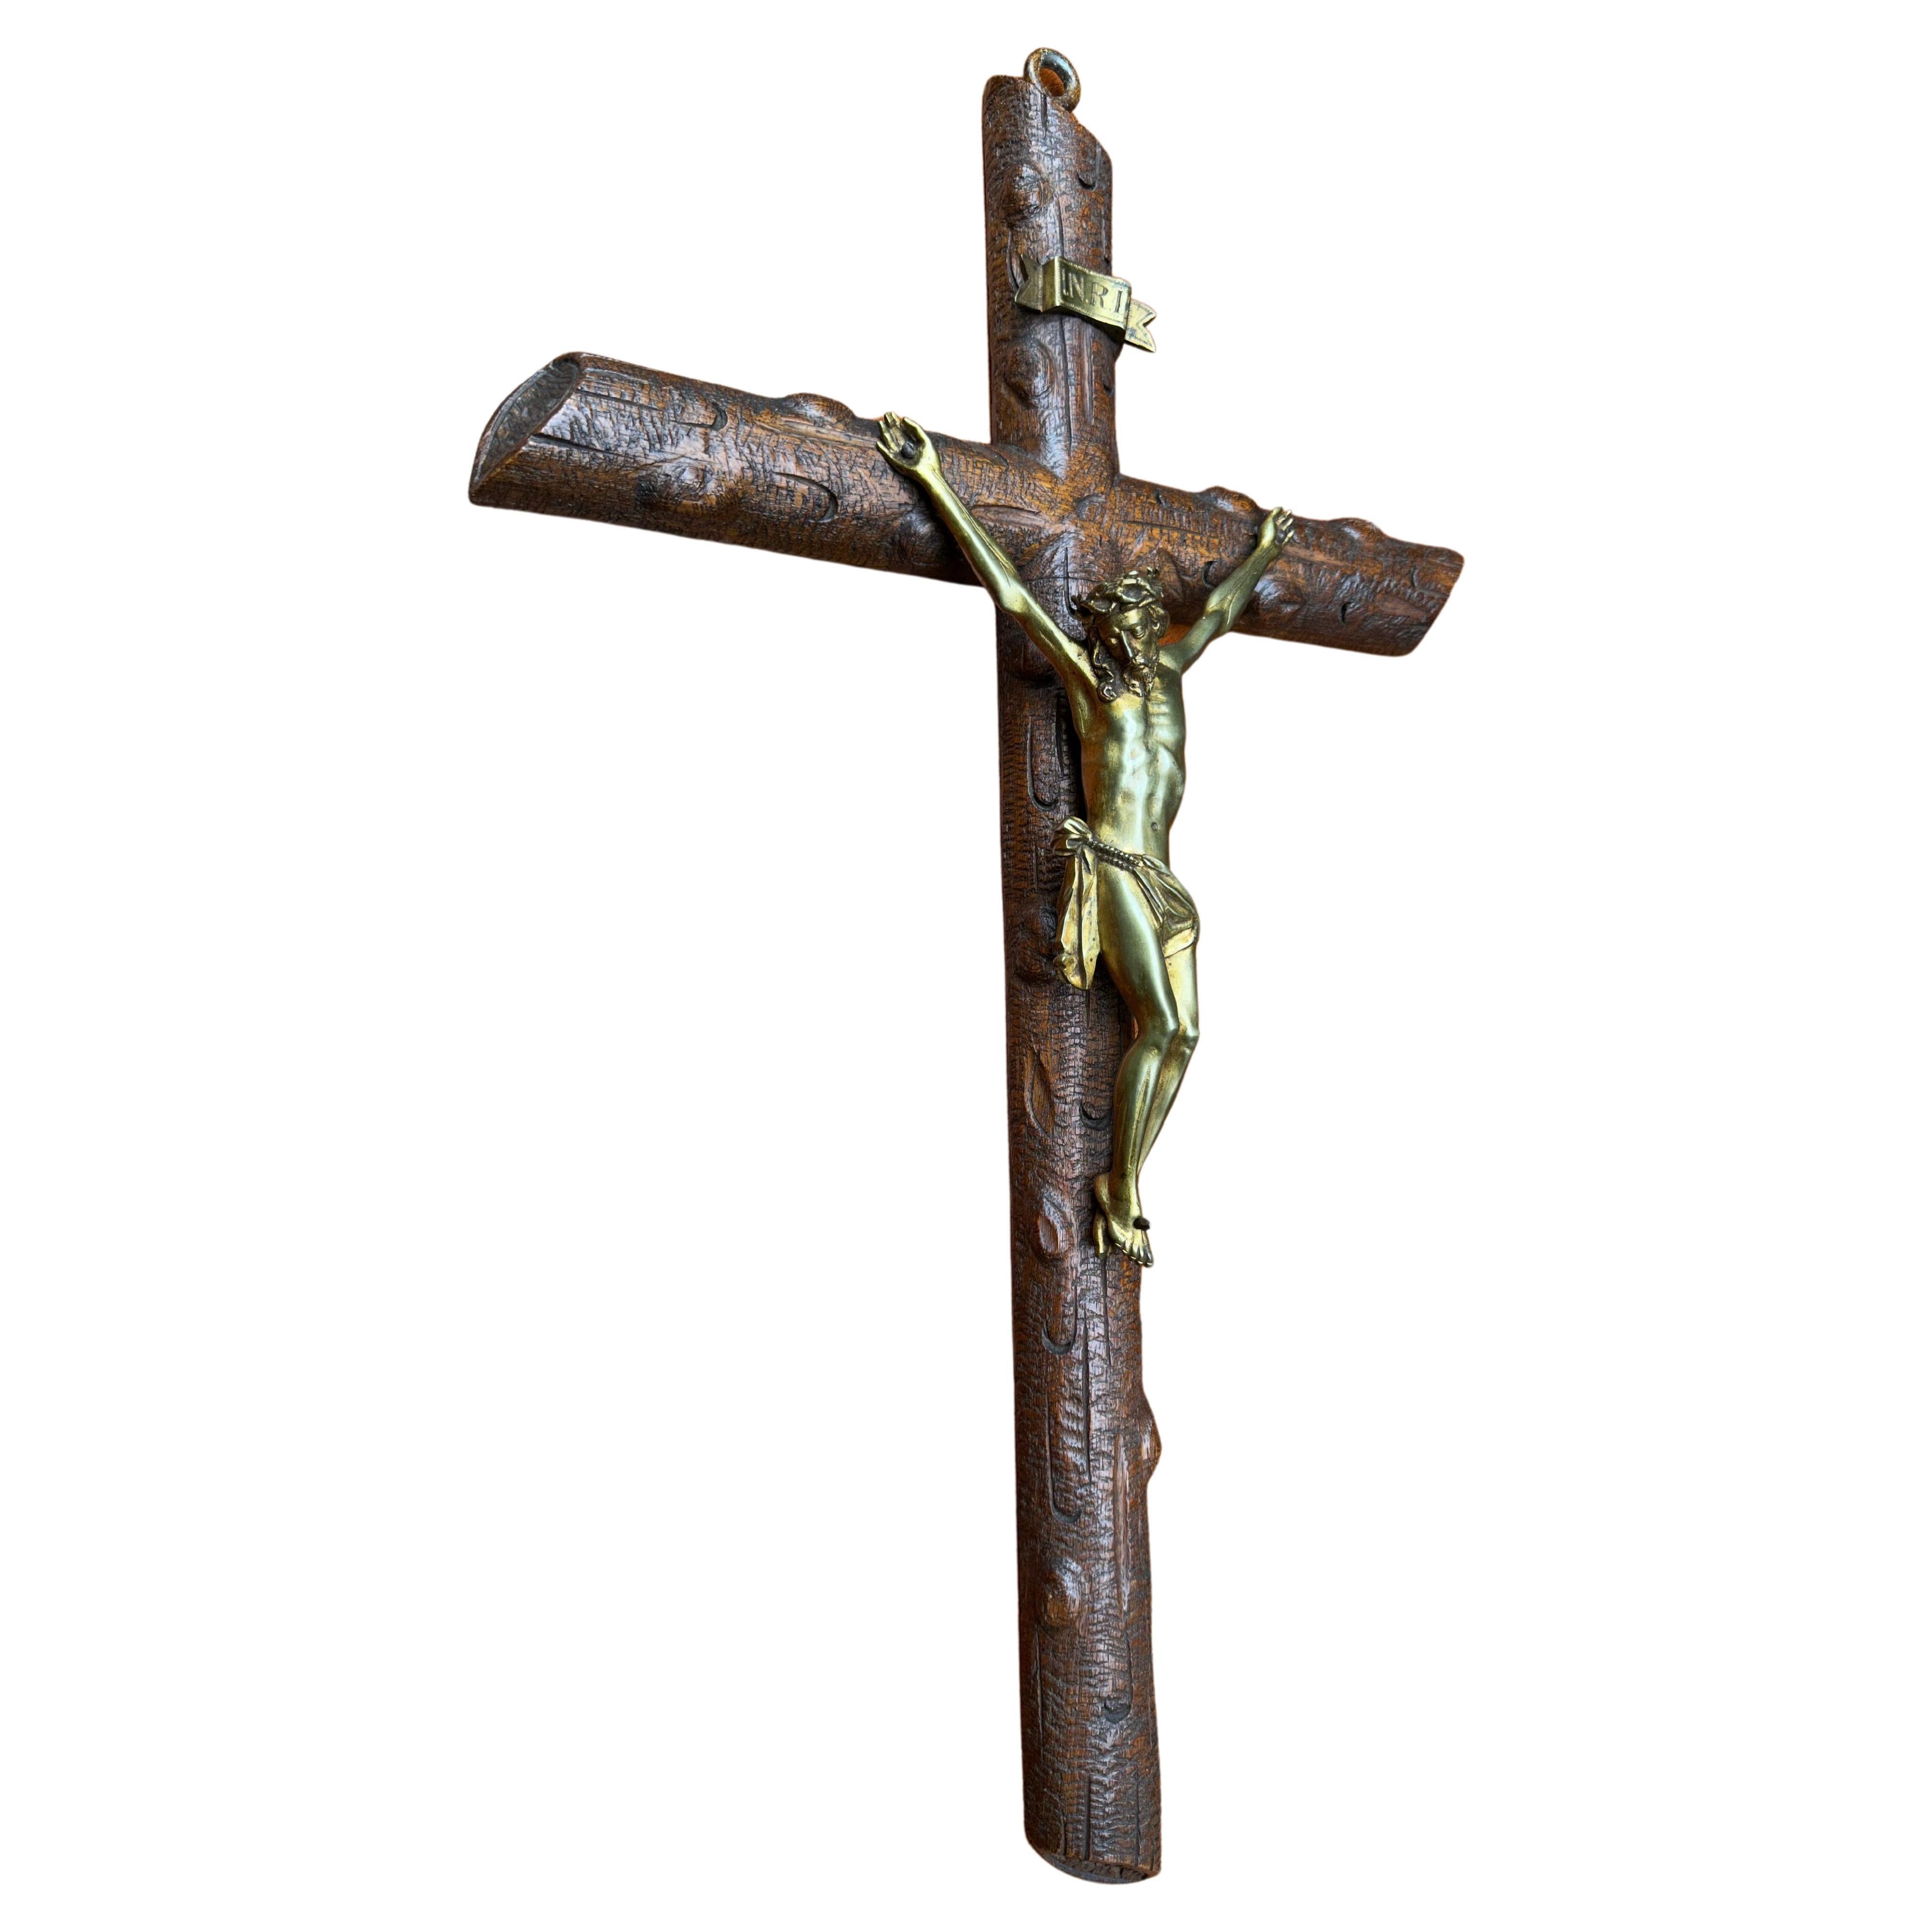 Antique Crucifix w. Fine Bronze Corpus and Stunning Hand Carved Nutwood Cross